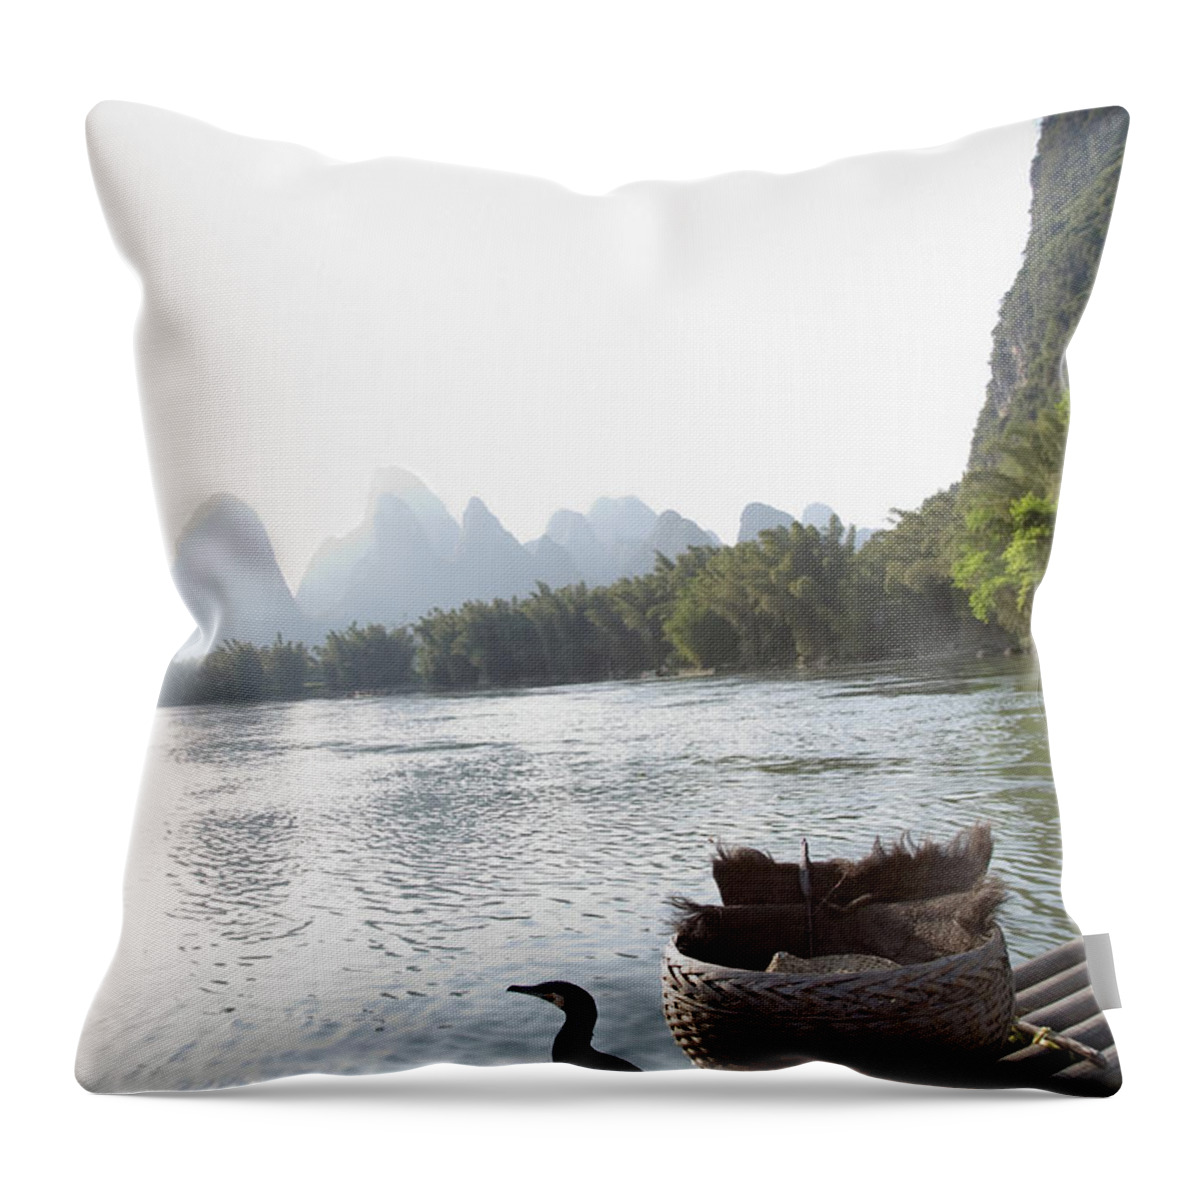 Tranquility Throw Pillow featuring the photograph China, Guilin, Lijang River, Trained by Jerry Driendl